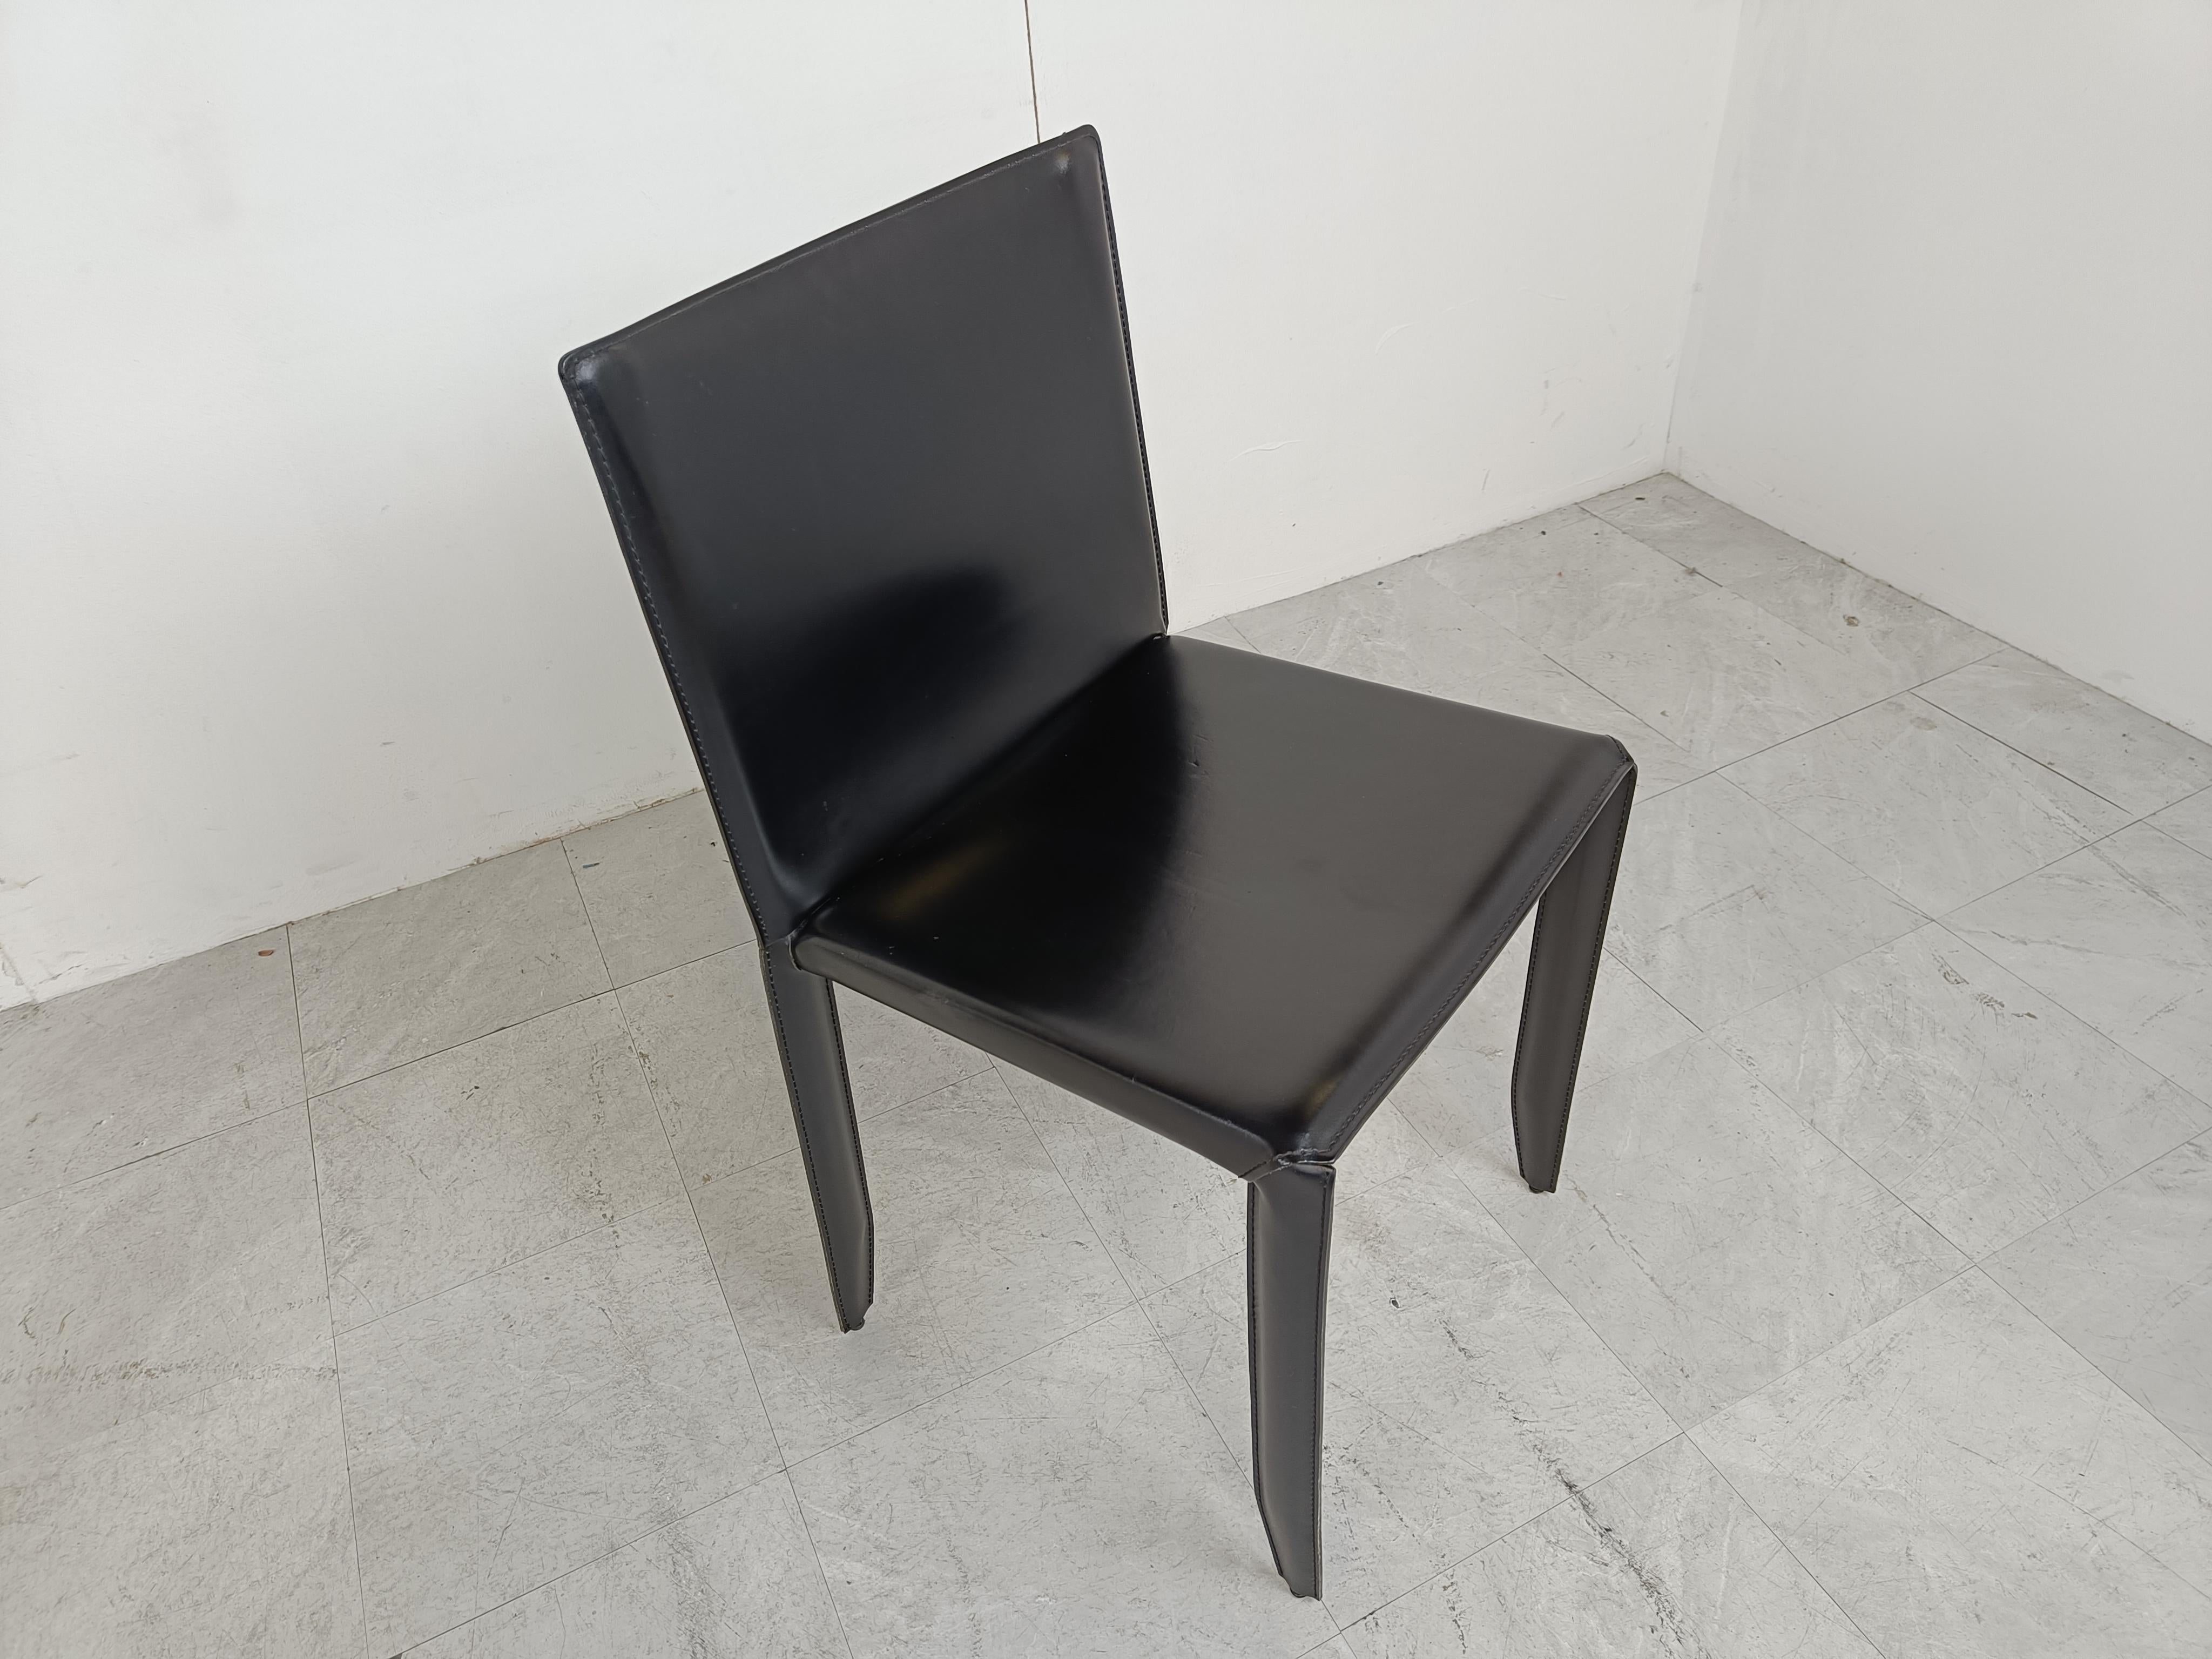 Vintage black leather upholstered dining chairs by Cattelan italy.

Comfortable dining chairs with nicely stiched leather.

Good overal condition

1980s - Italy

Dimensions
Height: 83cm/32.67